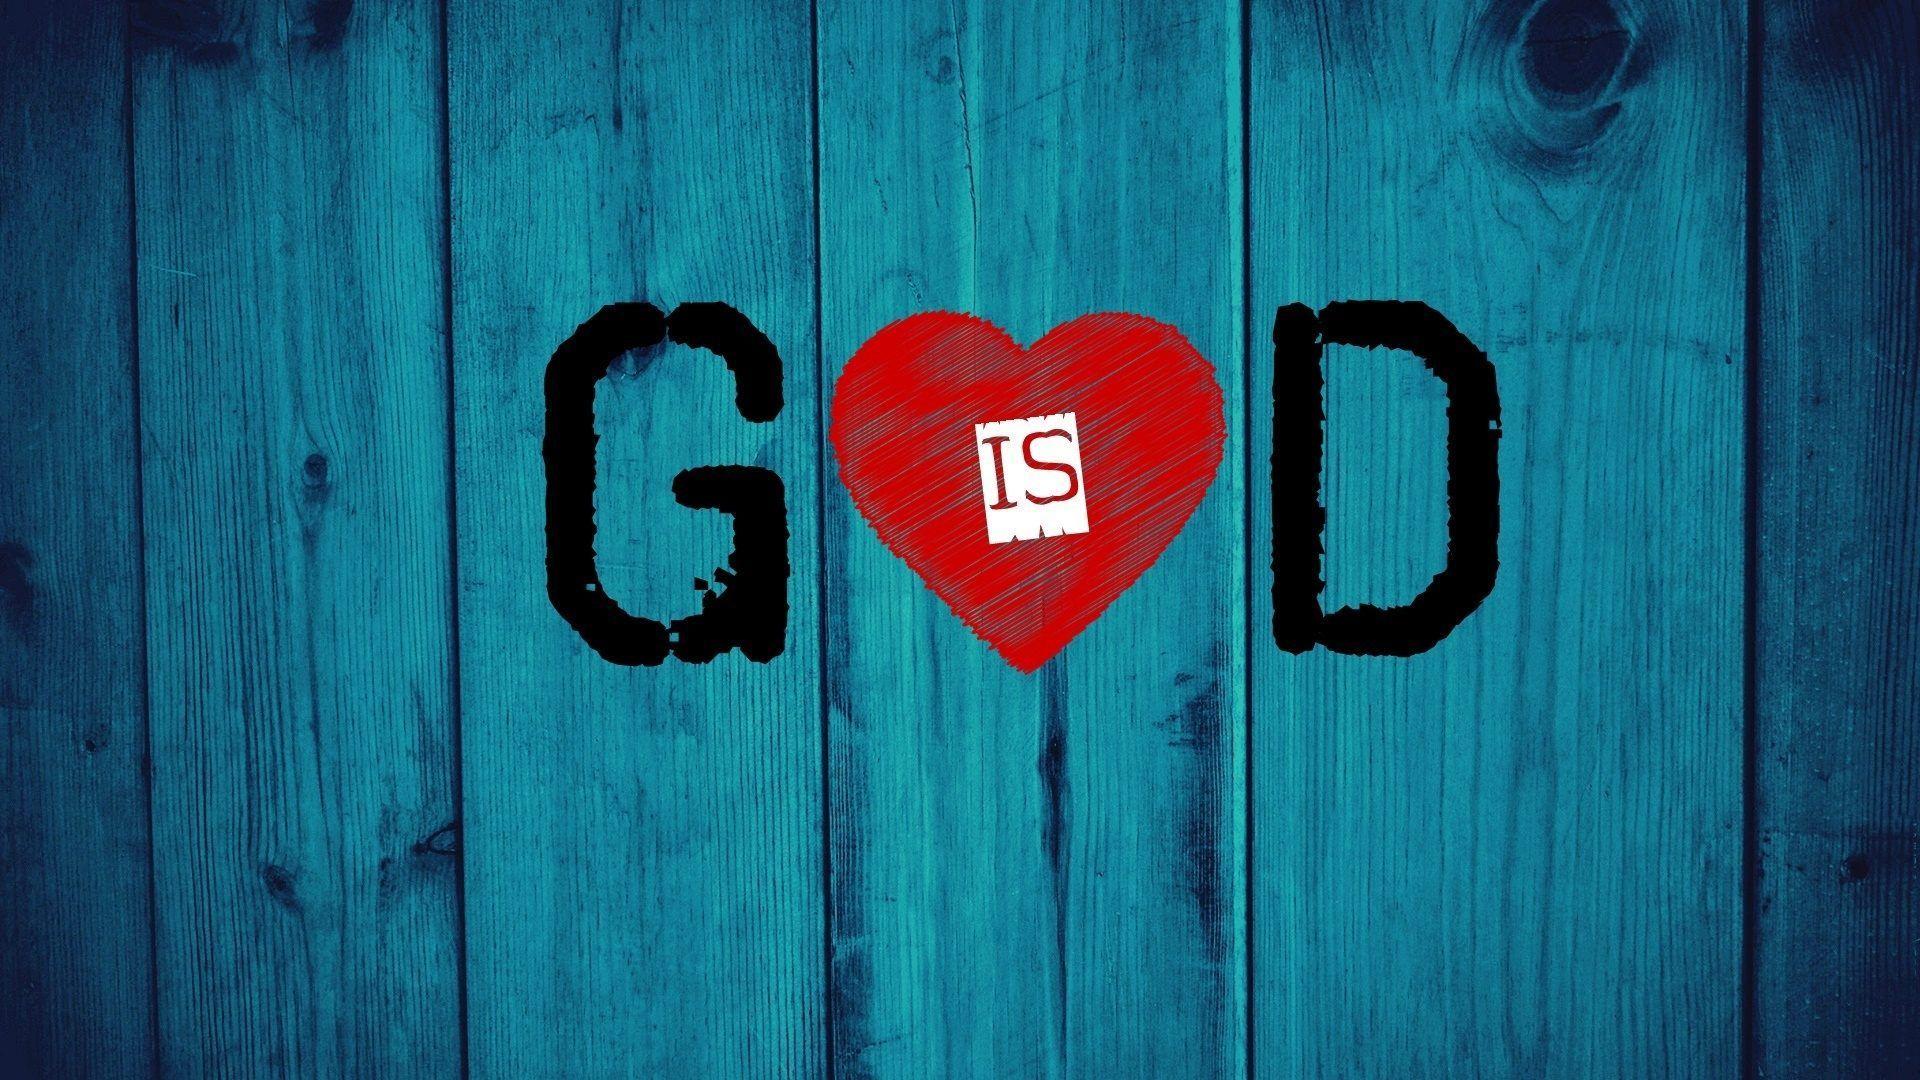 God is Love Wallpaper HD Download To Show Love Of God. Gods love, Love wallpaper, Wallpaper